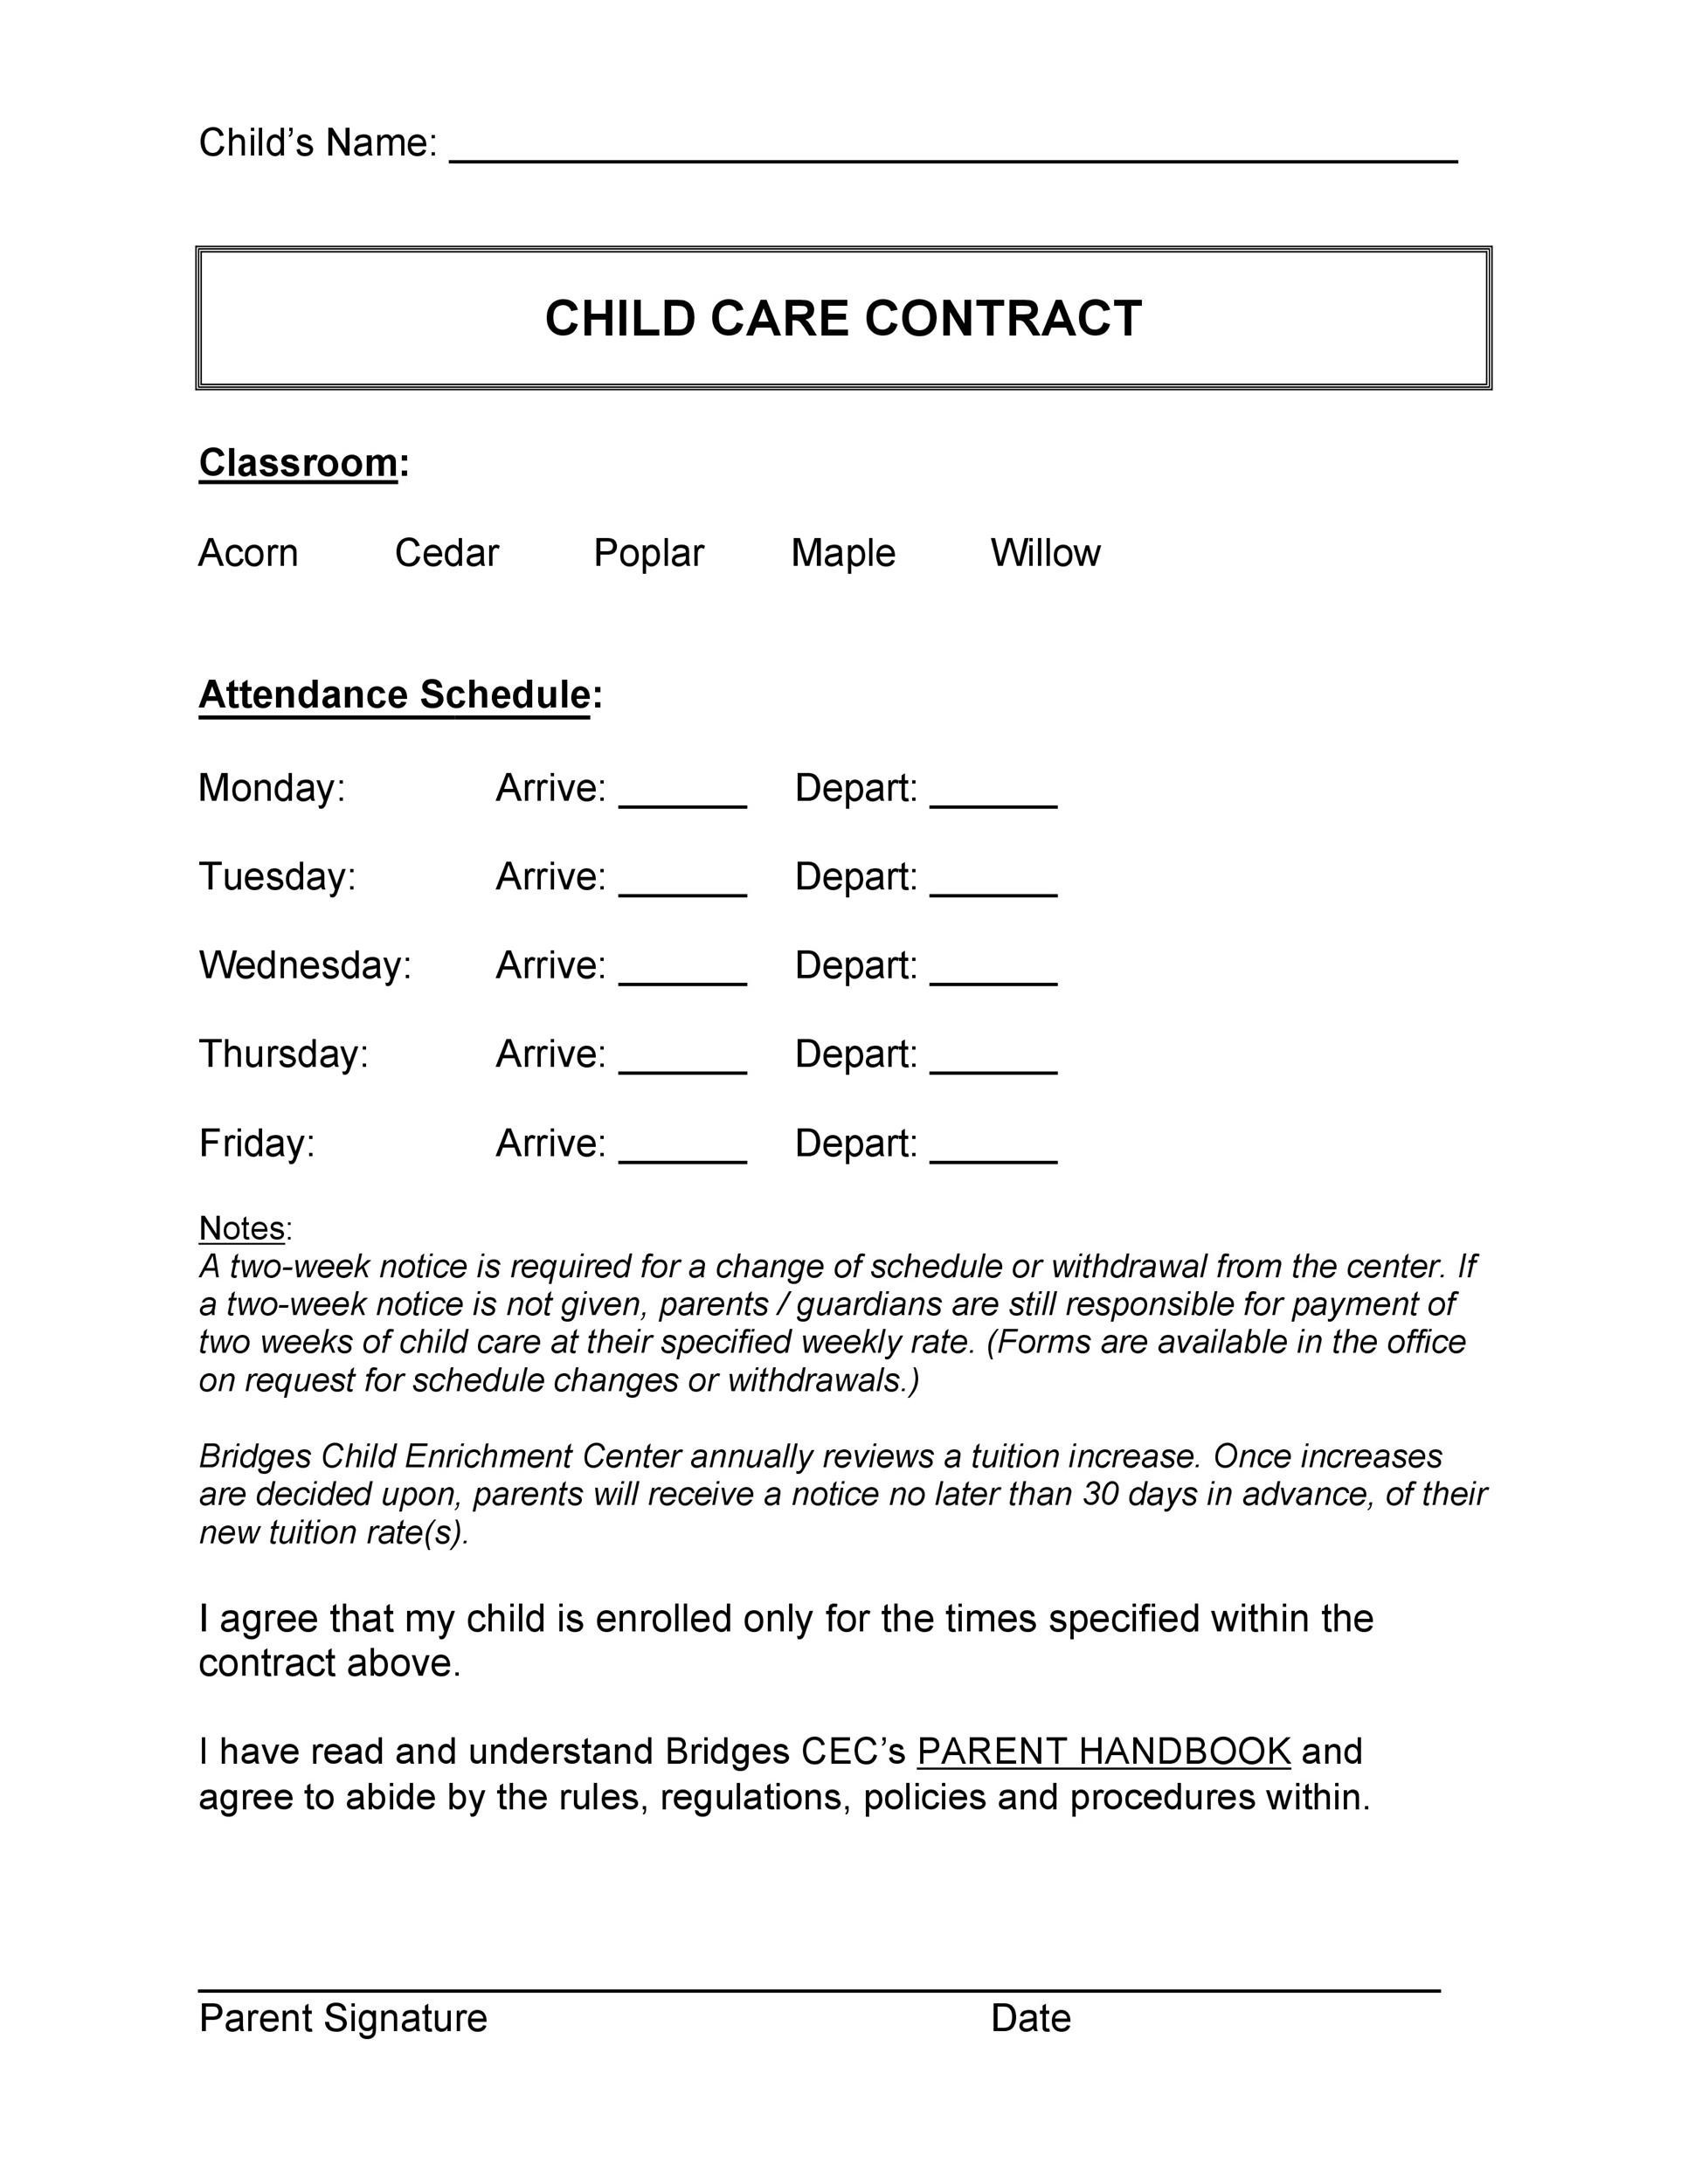 50-daycare-child-care-babysitting-contract-templates-free